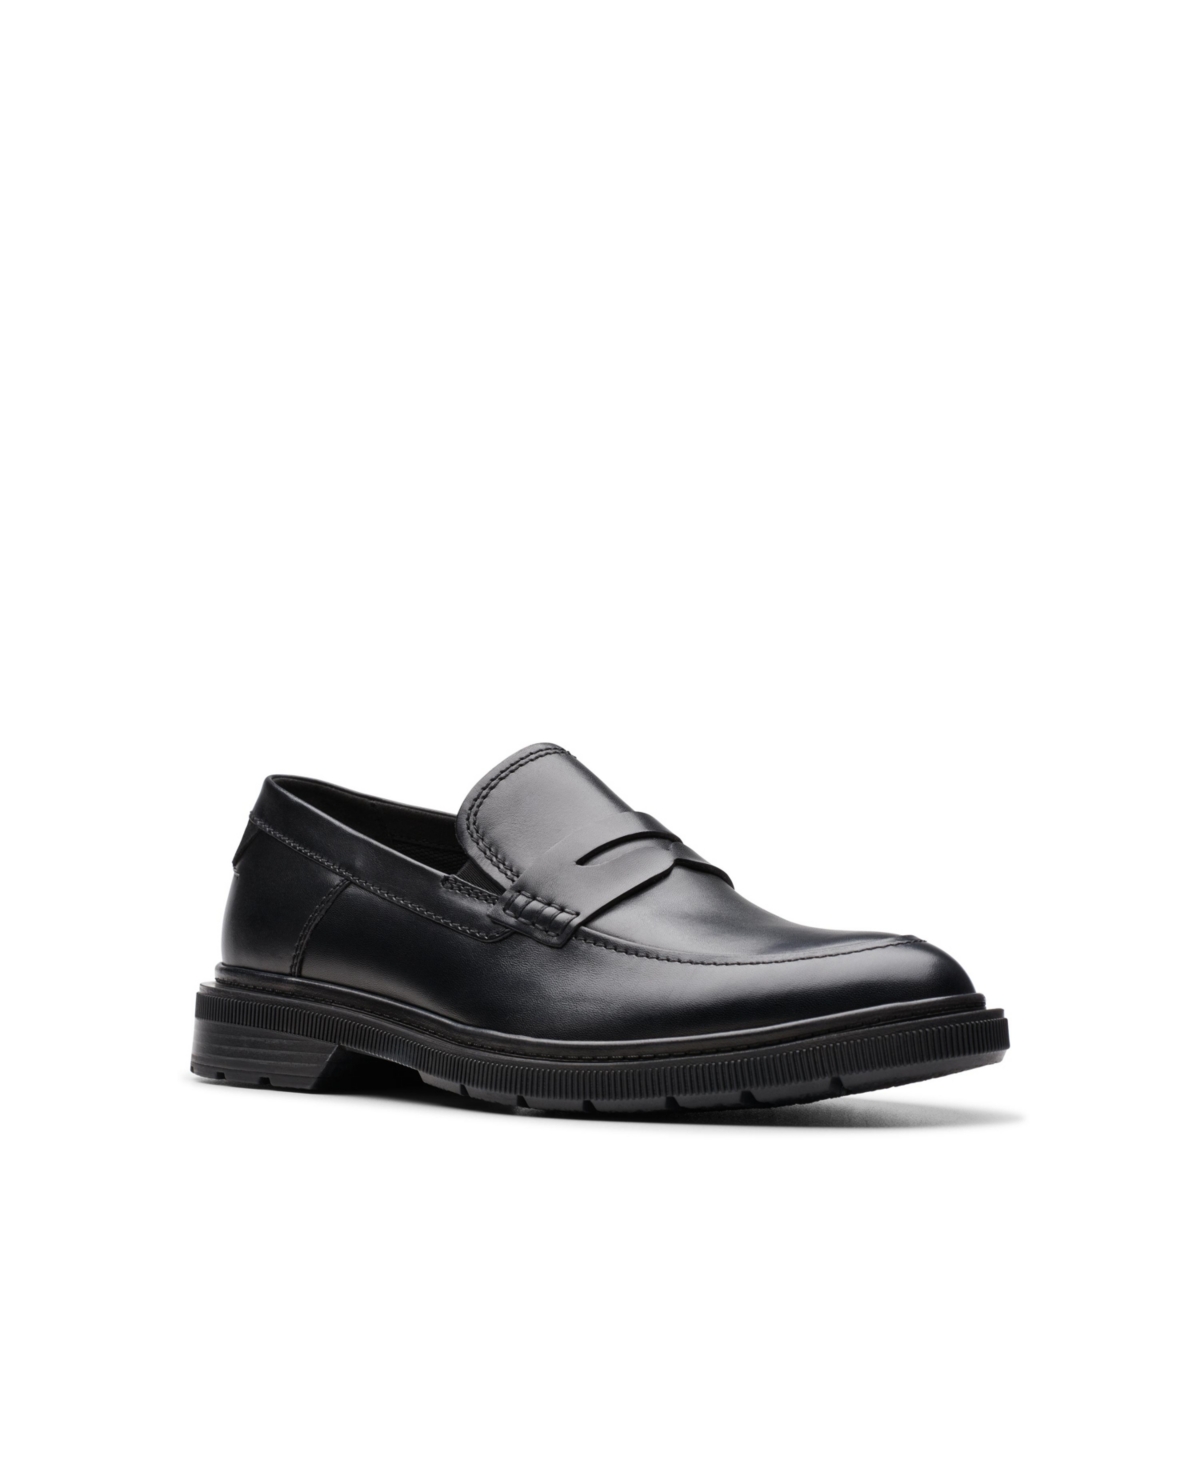 Clarks Men's Collection Burchill Penny Slip On Loafers In Black Leather